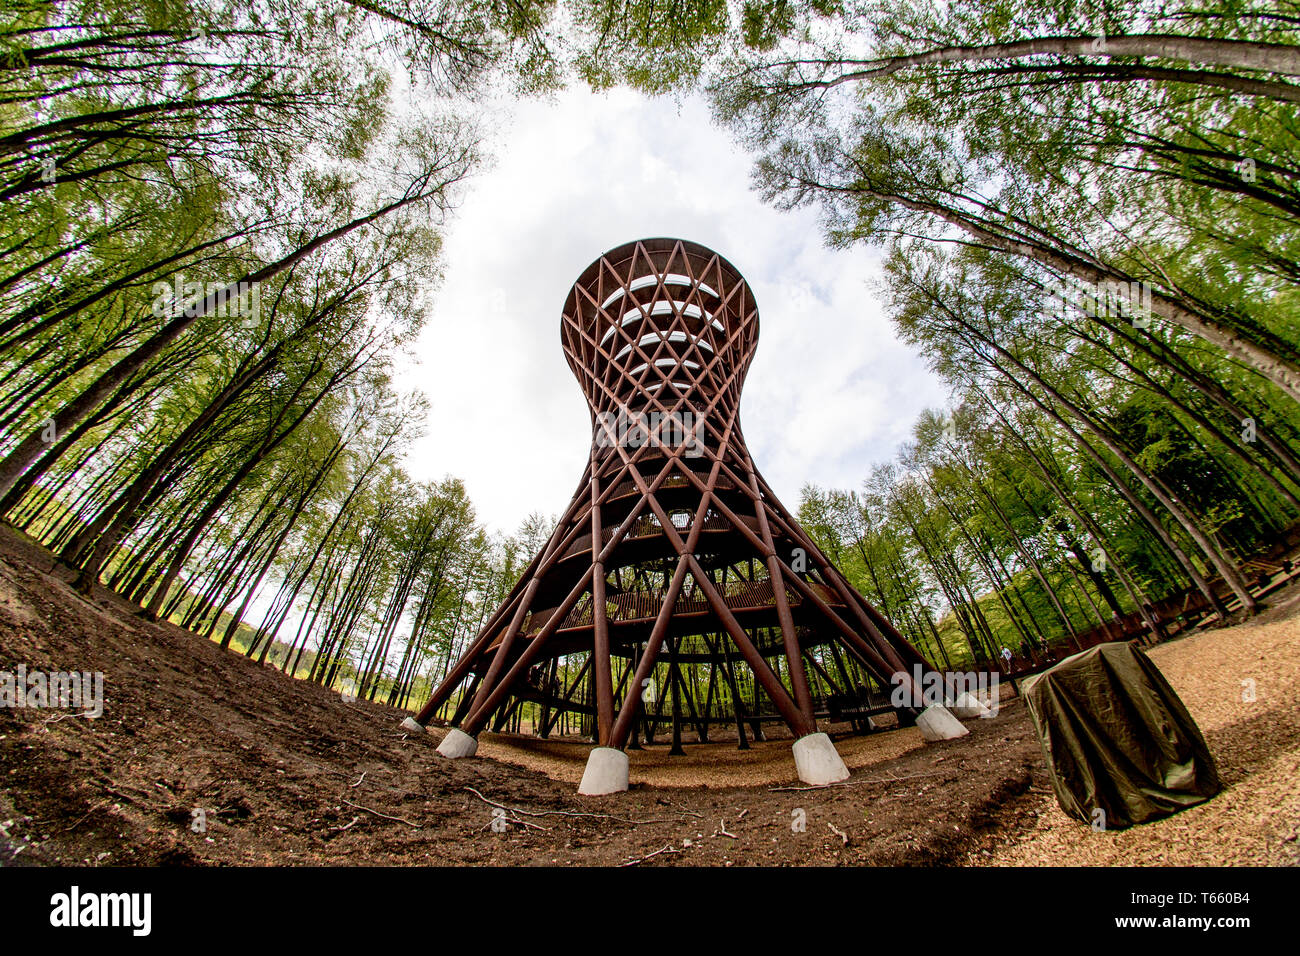 Denmark, Haslev - April 28, 2019. The 45 meter high spectacular spiral wood  and steel observation tower is overlooking the beautiful Gisselfeld  Klosters Forest as part of Camp Adventure in Haslev. (Photo